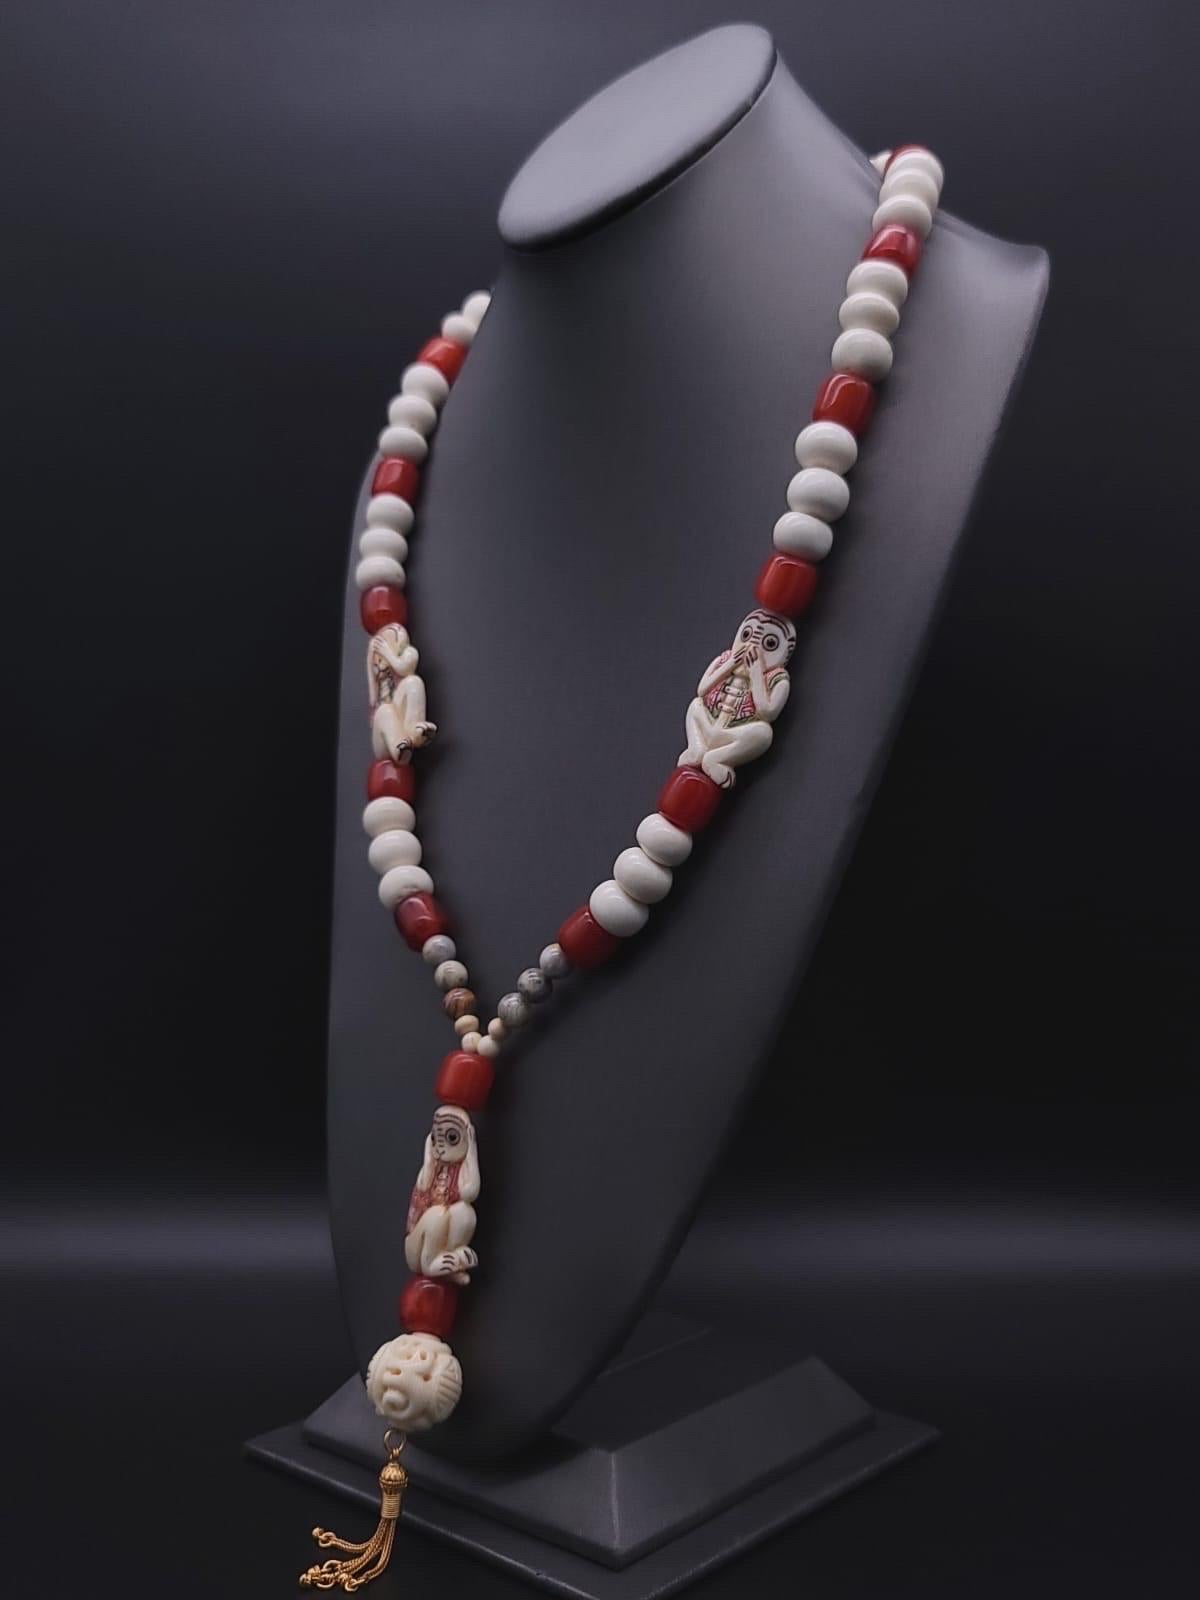 One-of-a-Kind

A popular maxim since the 17th century these 3 wise monkeys were on to something. This light-hearted necklace of Red copal ( younger amber) and carved ox bone monkeys anchored by a  longevity bead as well as a vermeil tassel. The